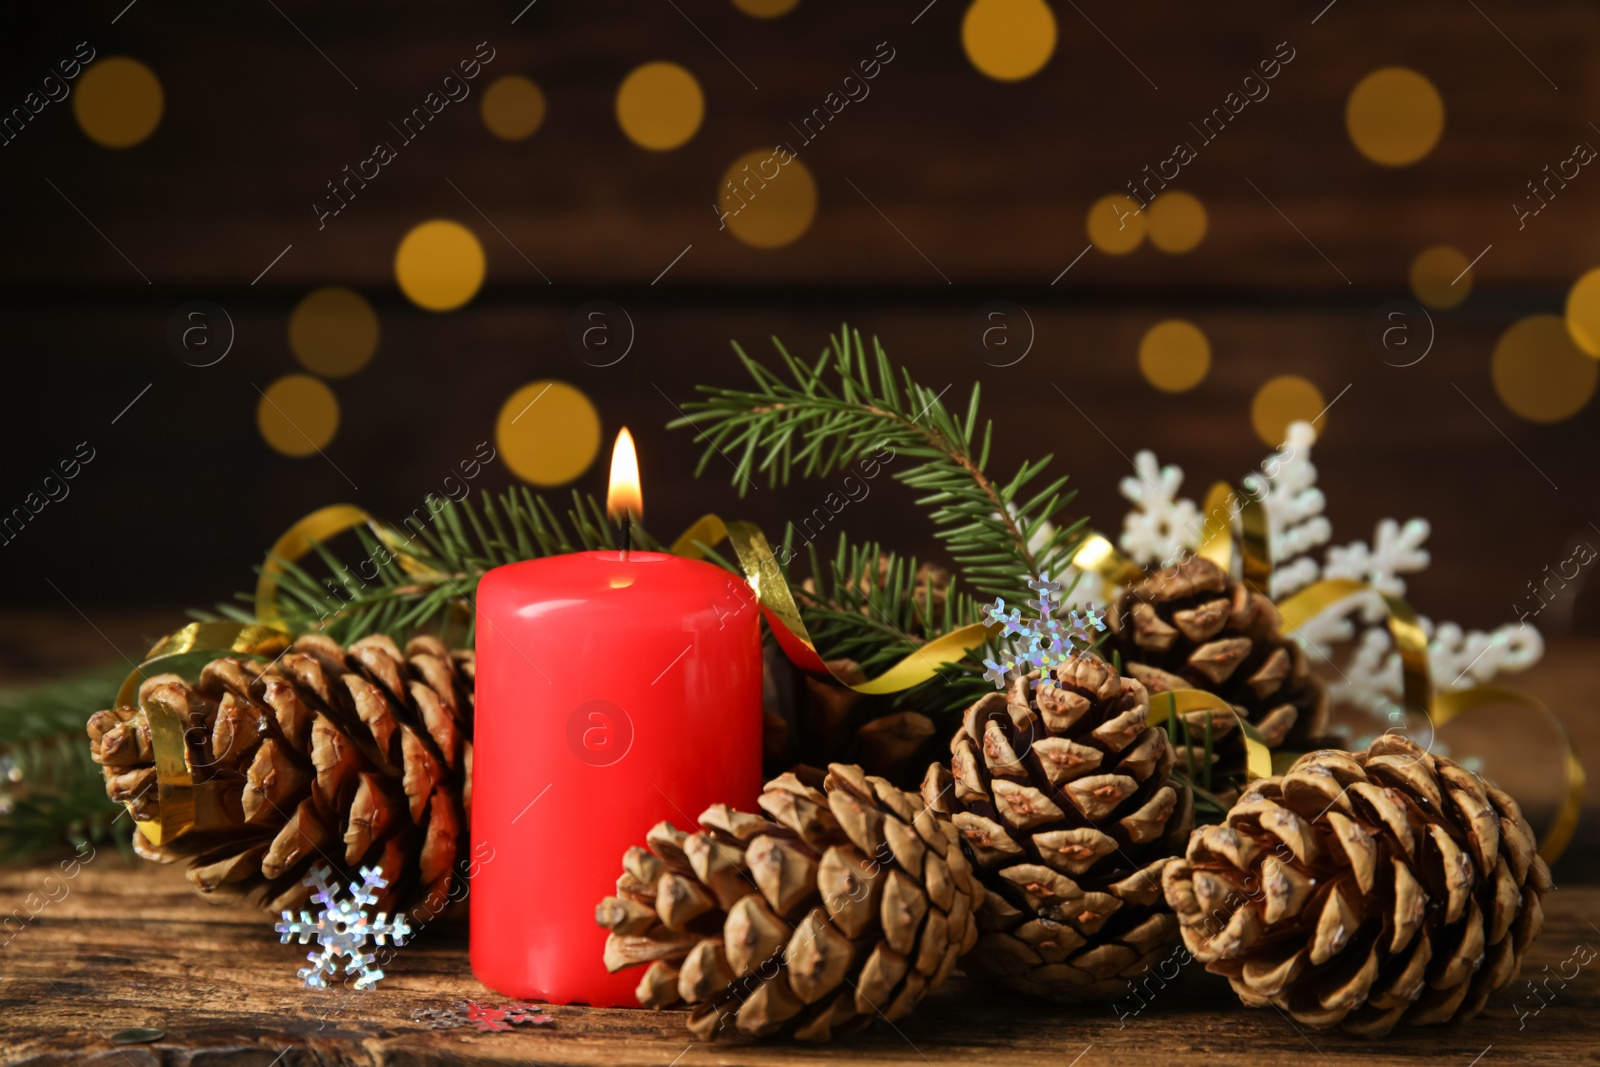 Photo of Burning candle, pine cones and fir tree branches on wooden table against blurred festive lights. Christmas eve